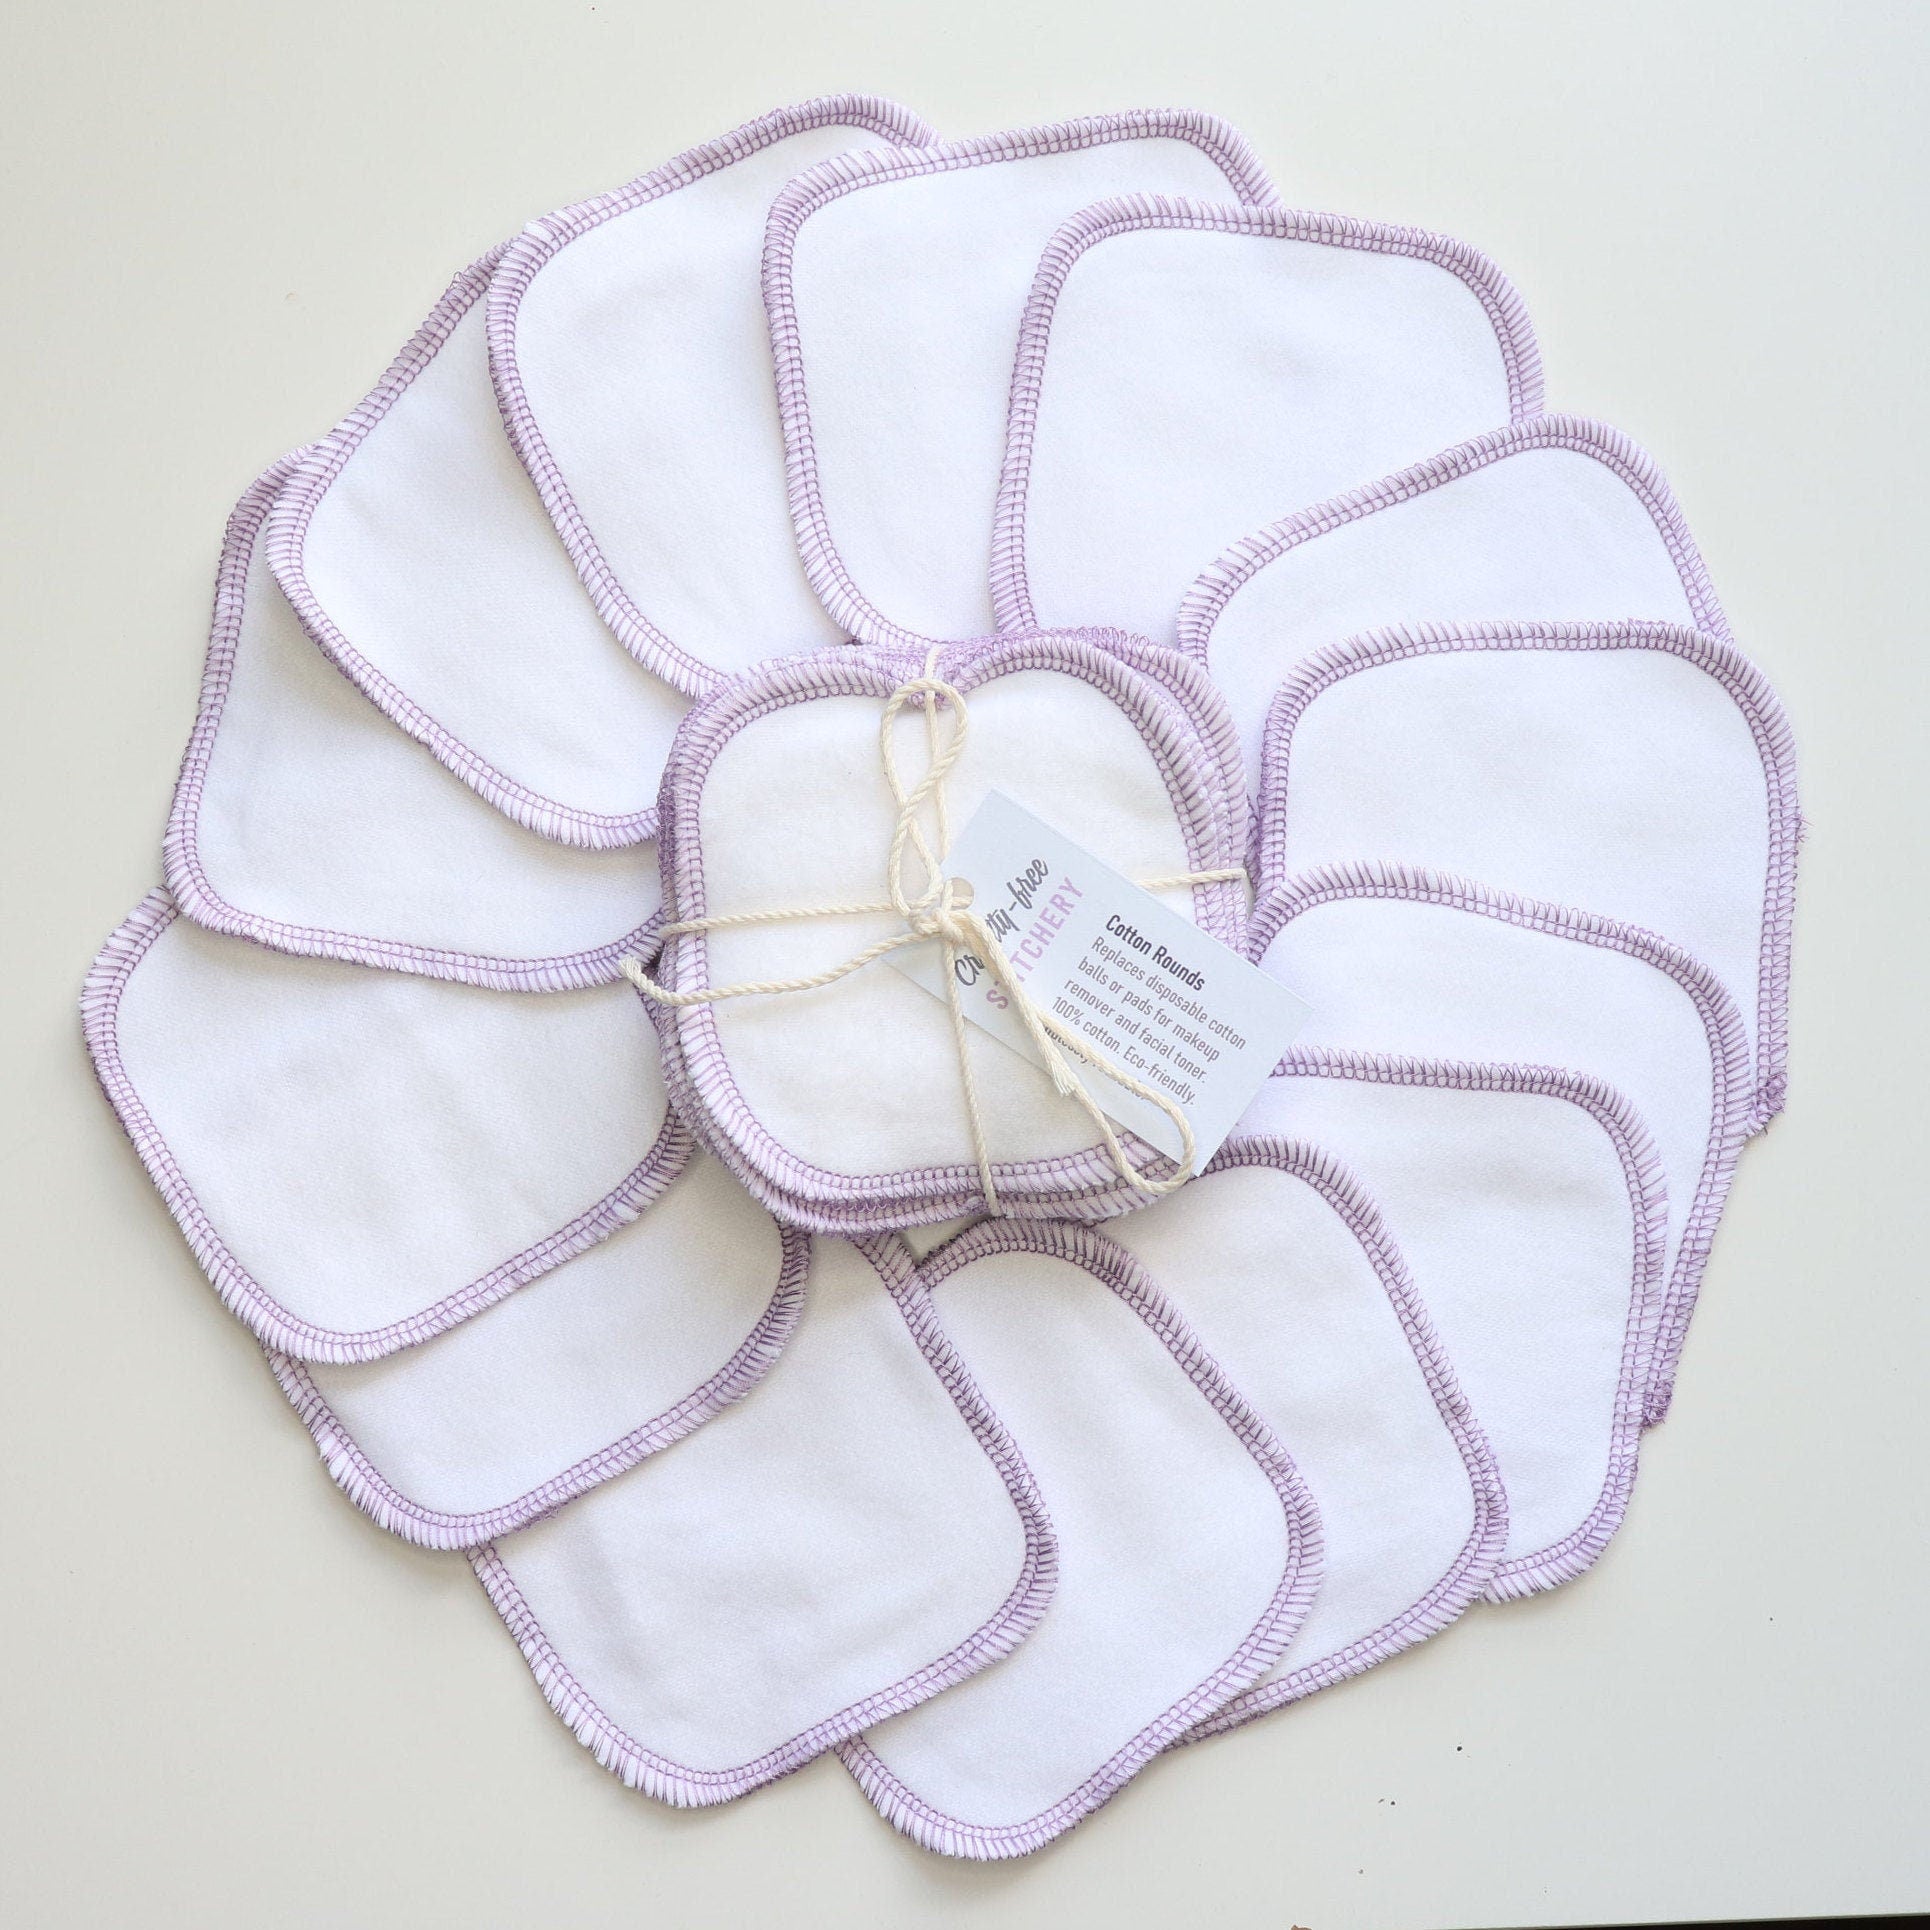 White reusable cotton rounds - arranged in a circle with a bundled pack in the center. They are white fabric that is stitched around the edges in a rounded square shape with light purple thread.